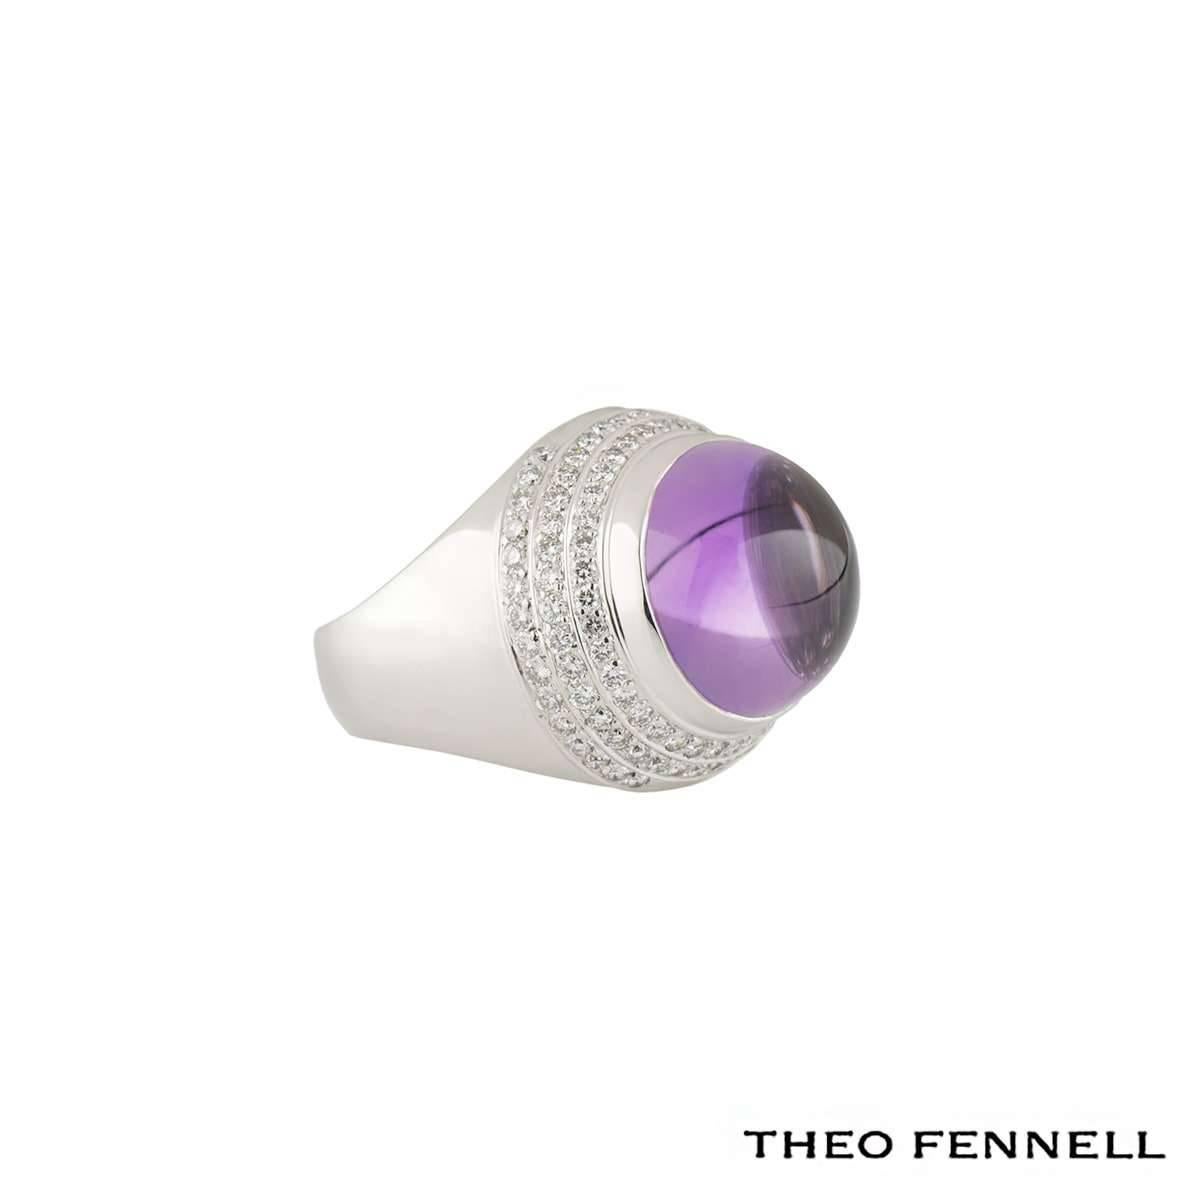 A fashionable 18k white gold dress ring by Theo Fennell. The dome shaped ring is set to the centre with a cabochon cut amethyst weighing approximately 12.00ct complimented by 3 circular rows of round brilliant cut diamonds totalling approximately